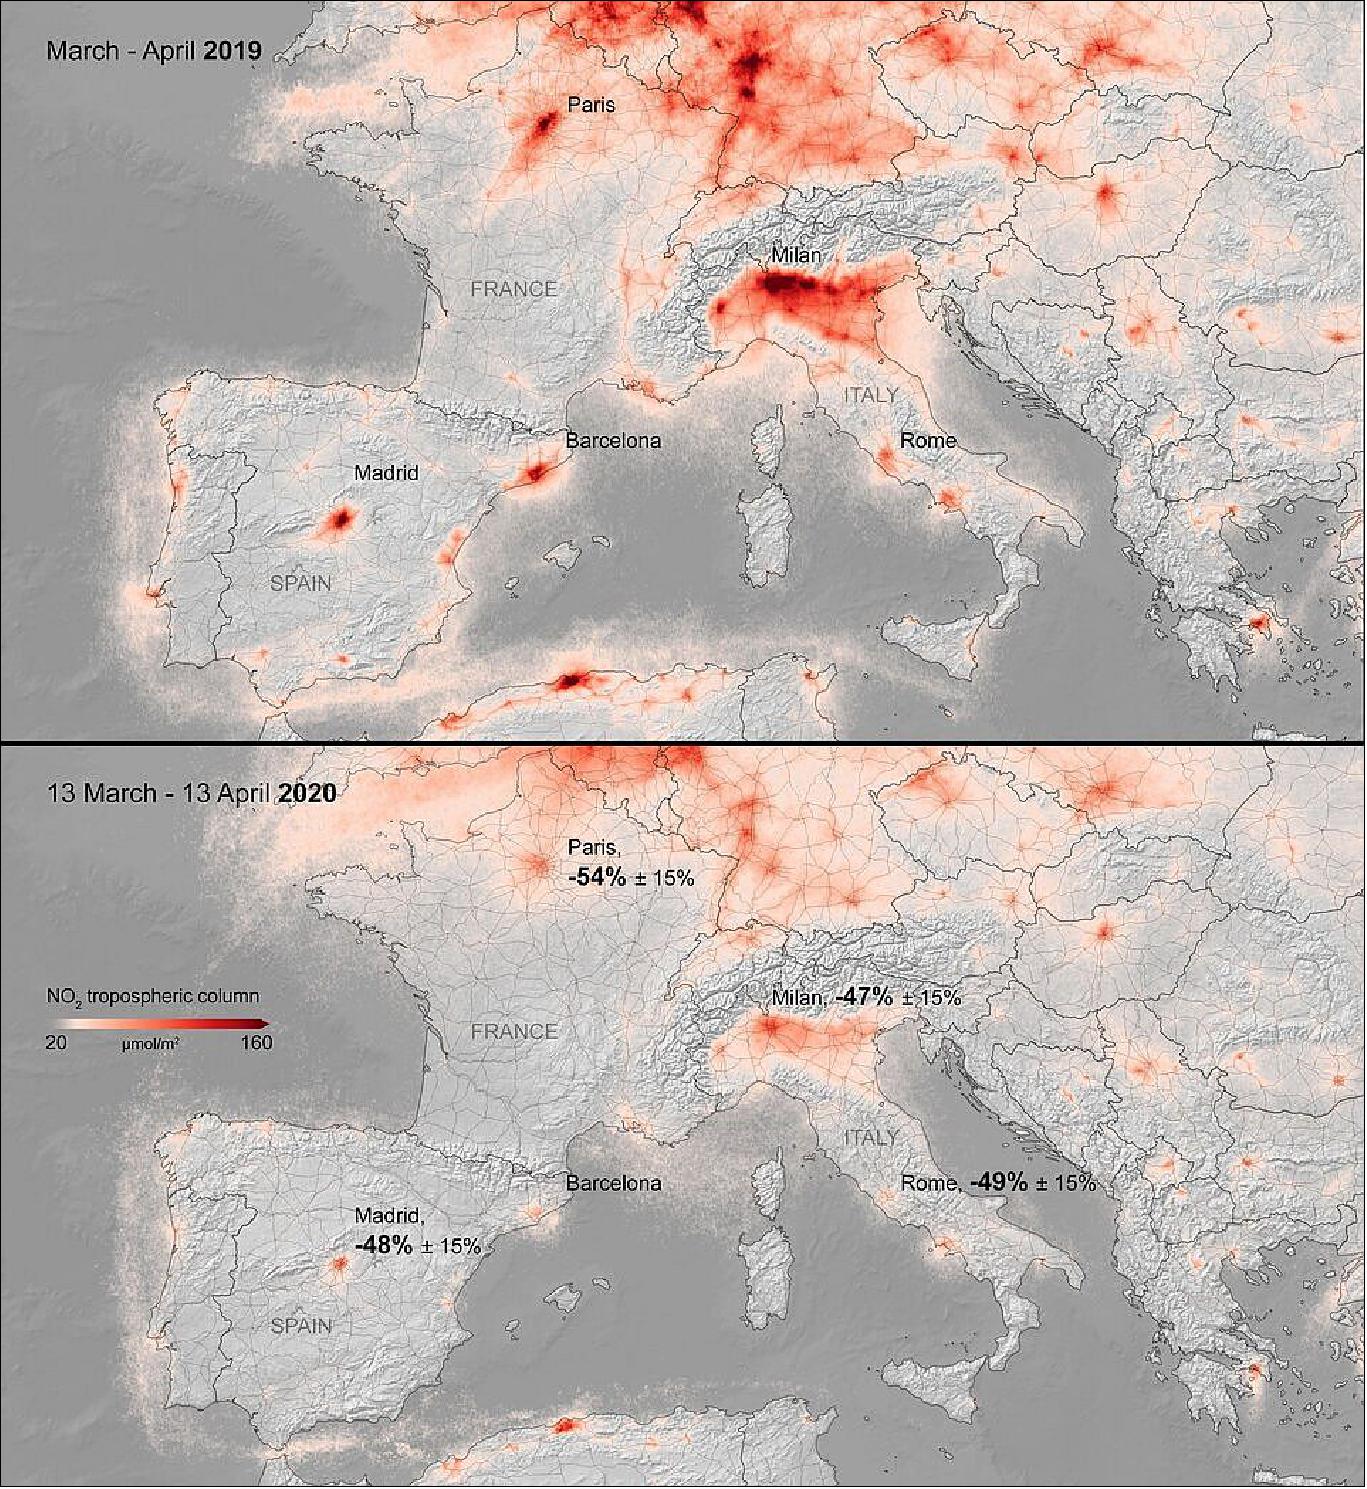 Figure 75: The new images show the nitrogen dioxide concentrations from 13 March until 13 April 2020, compared to the March-April averaged concentrations from 2019. Madrid, Milan and Rome saw decreases of around 45%, while Paris saw a dramatic drop of 54% – coinciding with the strict quarantine measures implemented across Europe (image credit: ESA, the images contain modified Copernicus Sentinel data (2019-20), processed by KNMI/ESA)